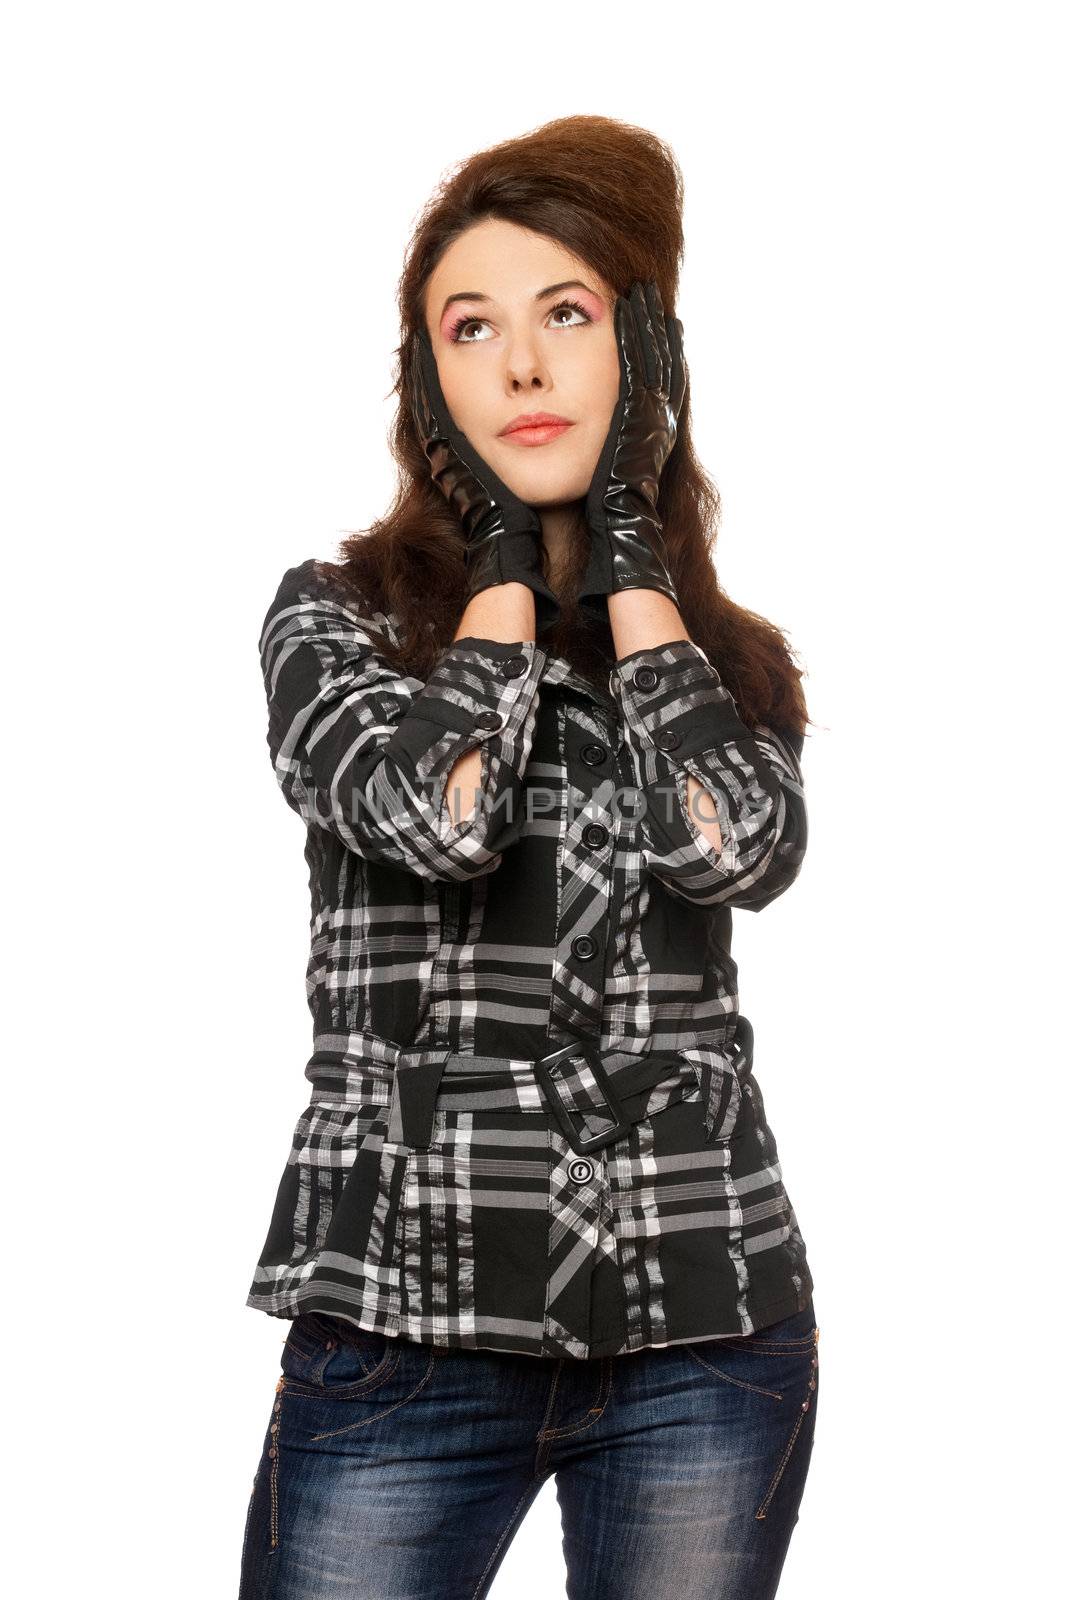 Portrait of pensive young woman in a checkered  jacket